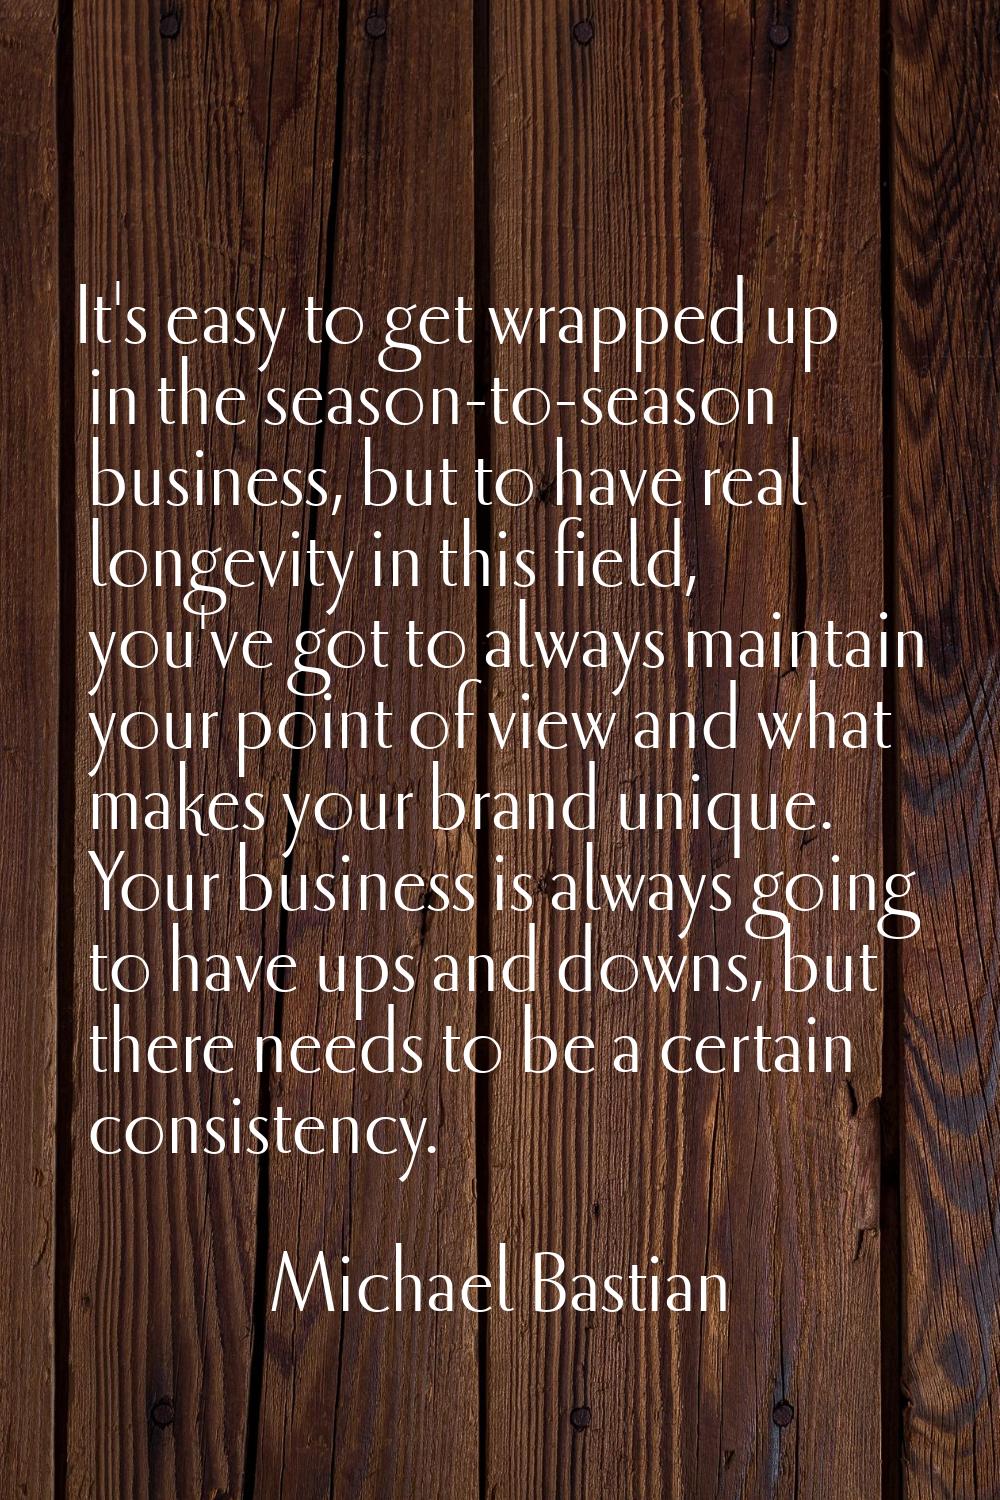 It's easy to get wrapped up in the season-to-season business, but to have real longevity in this fi